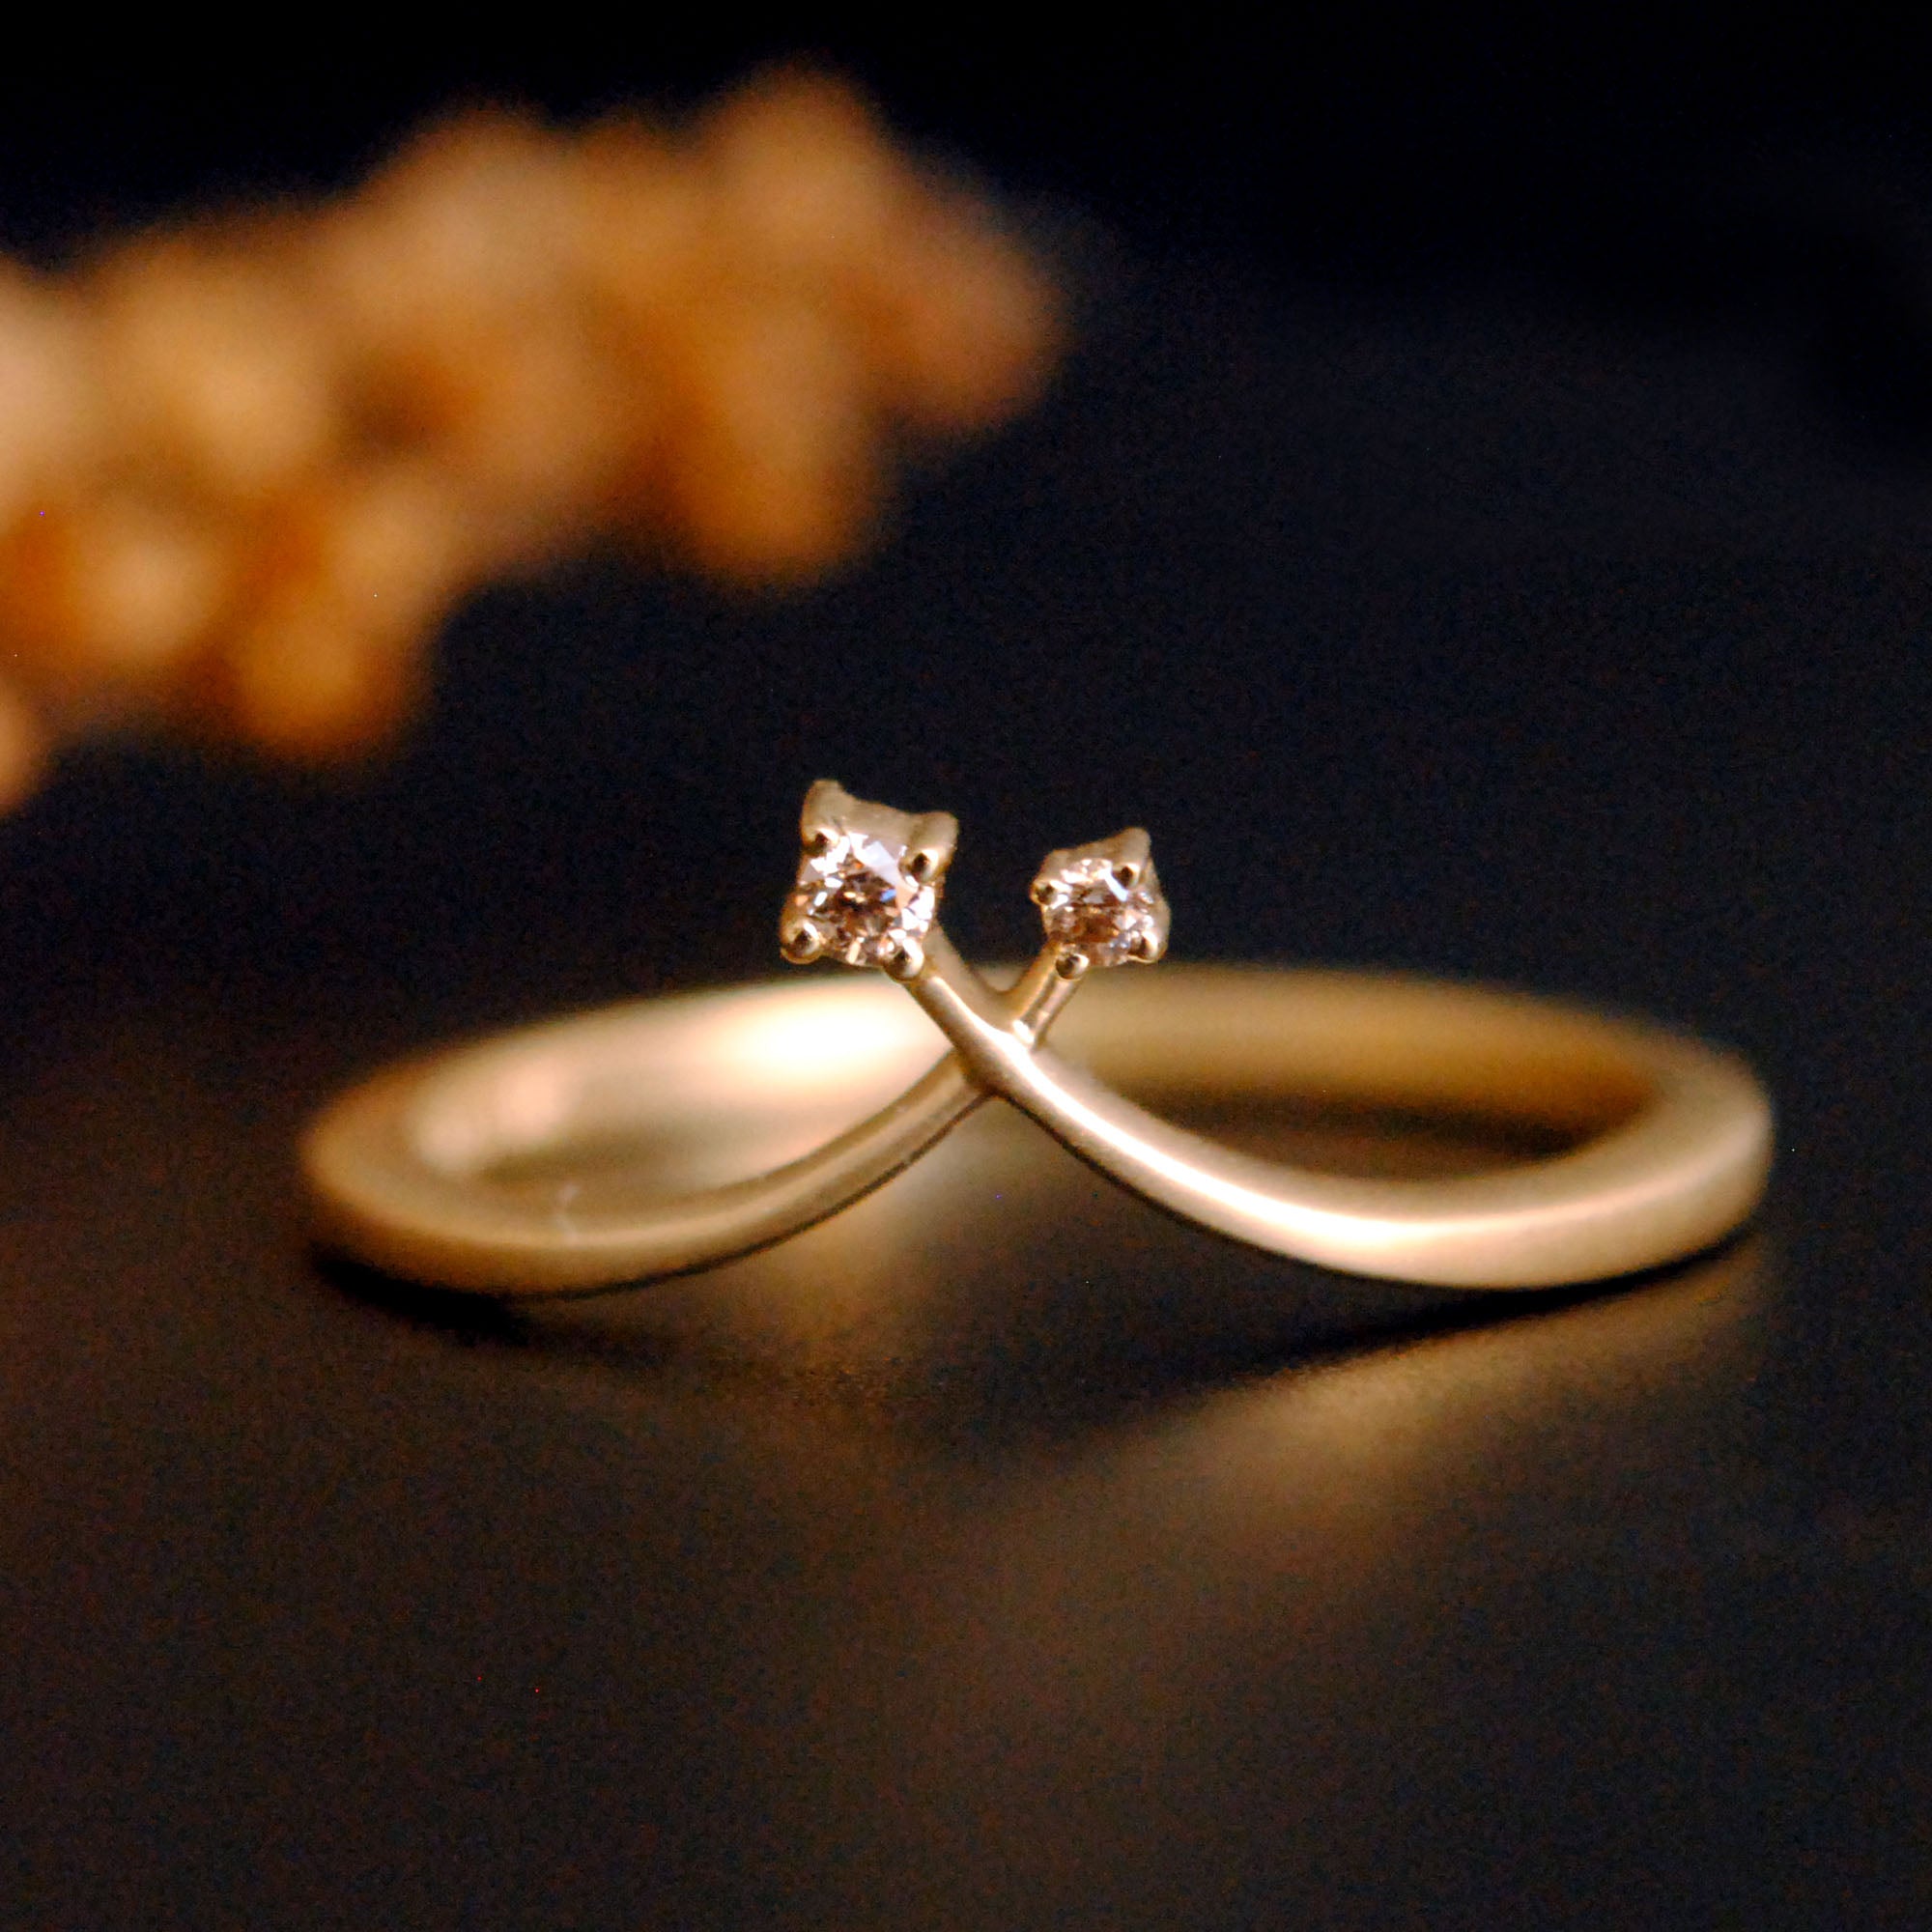 Champagne Diamond Engagement Rings | Unique Gold Rings 6.75 US